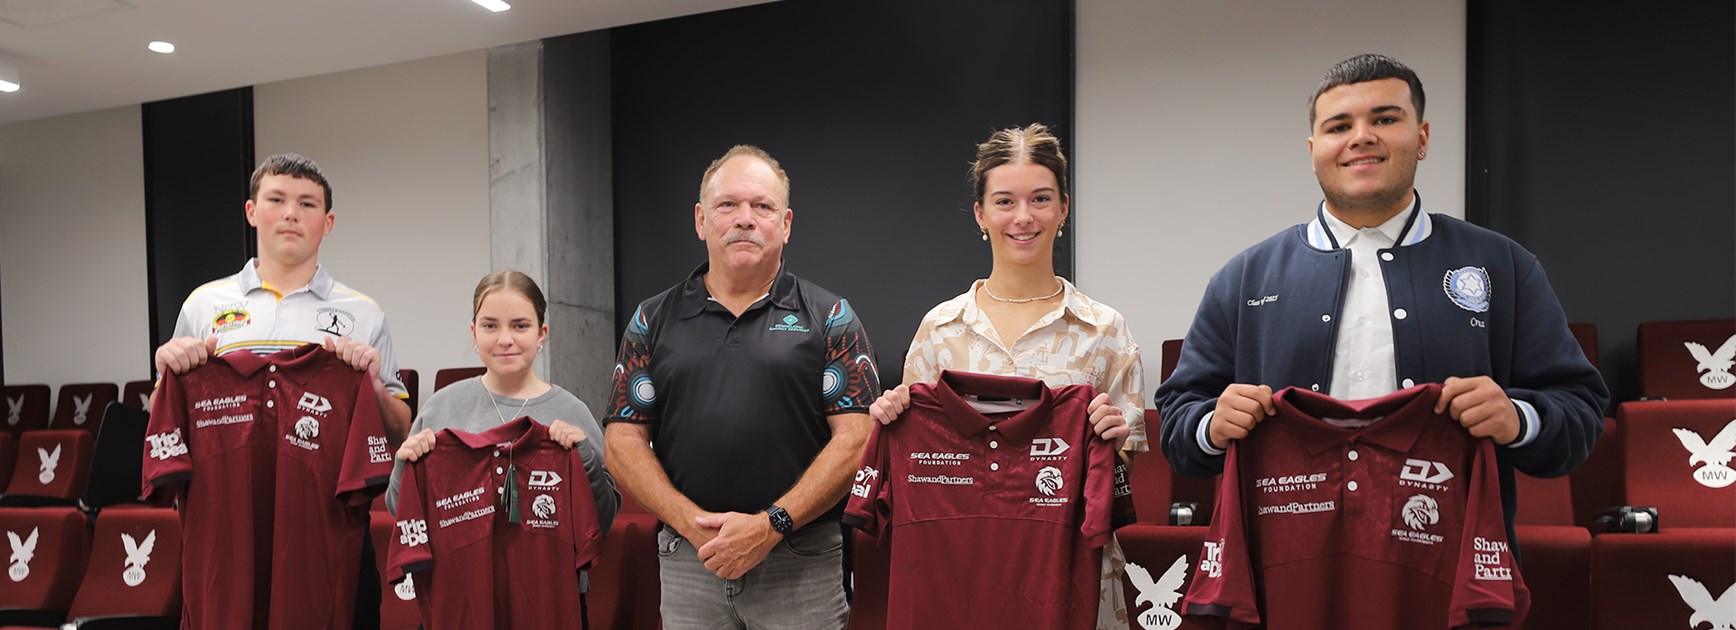 Sea Eagles recognise Youth Summit representatives